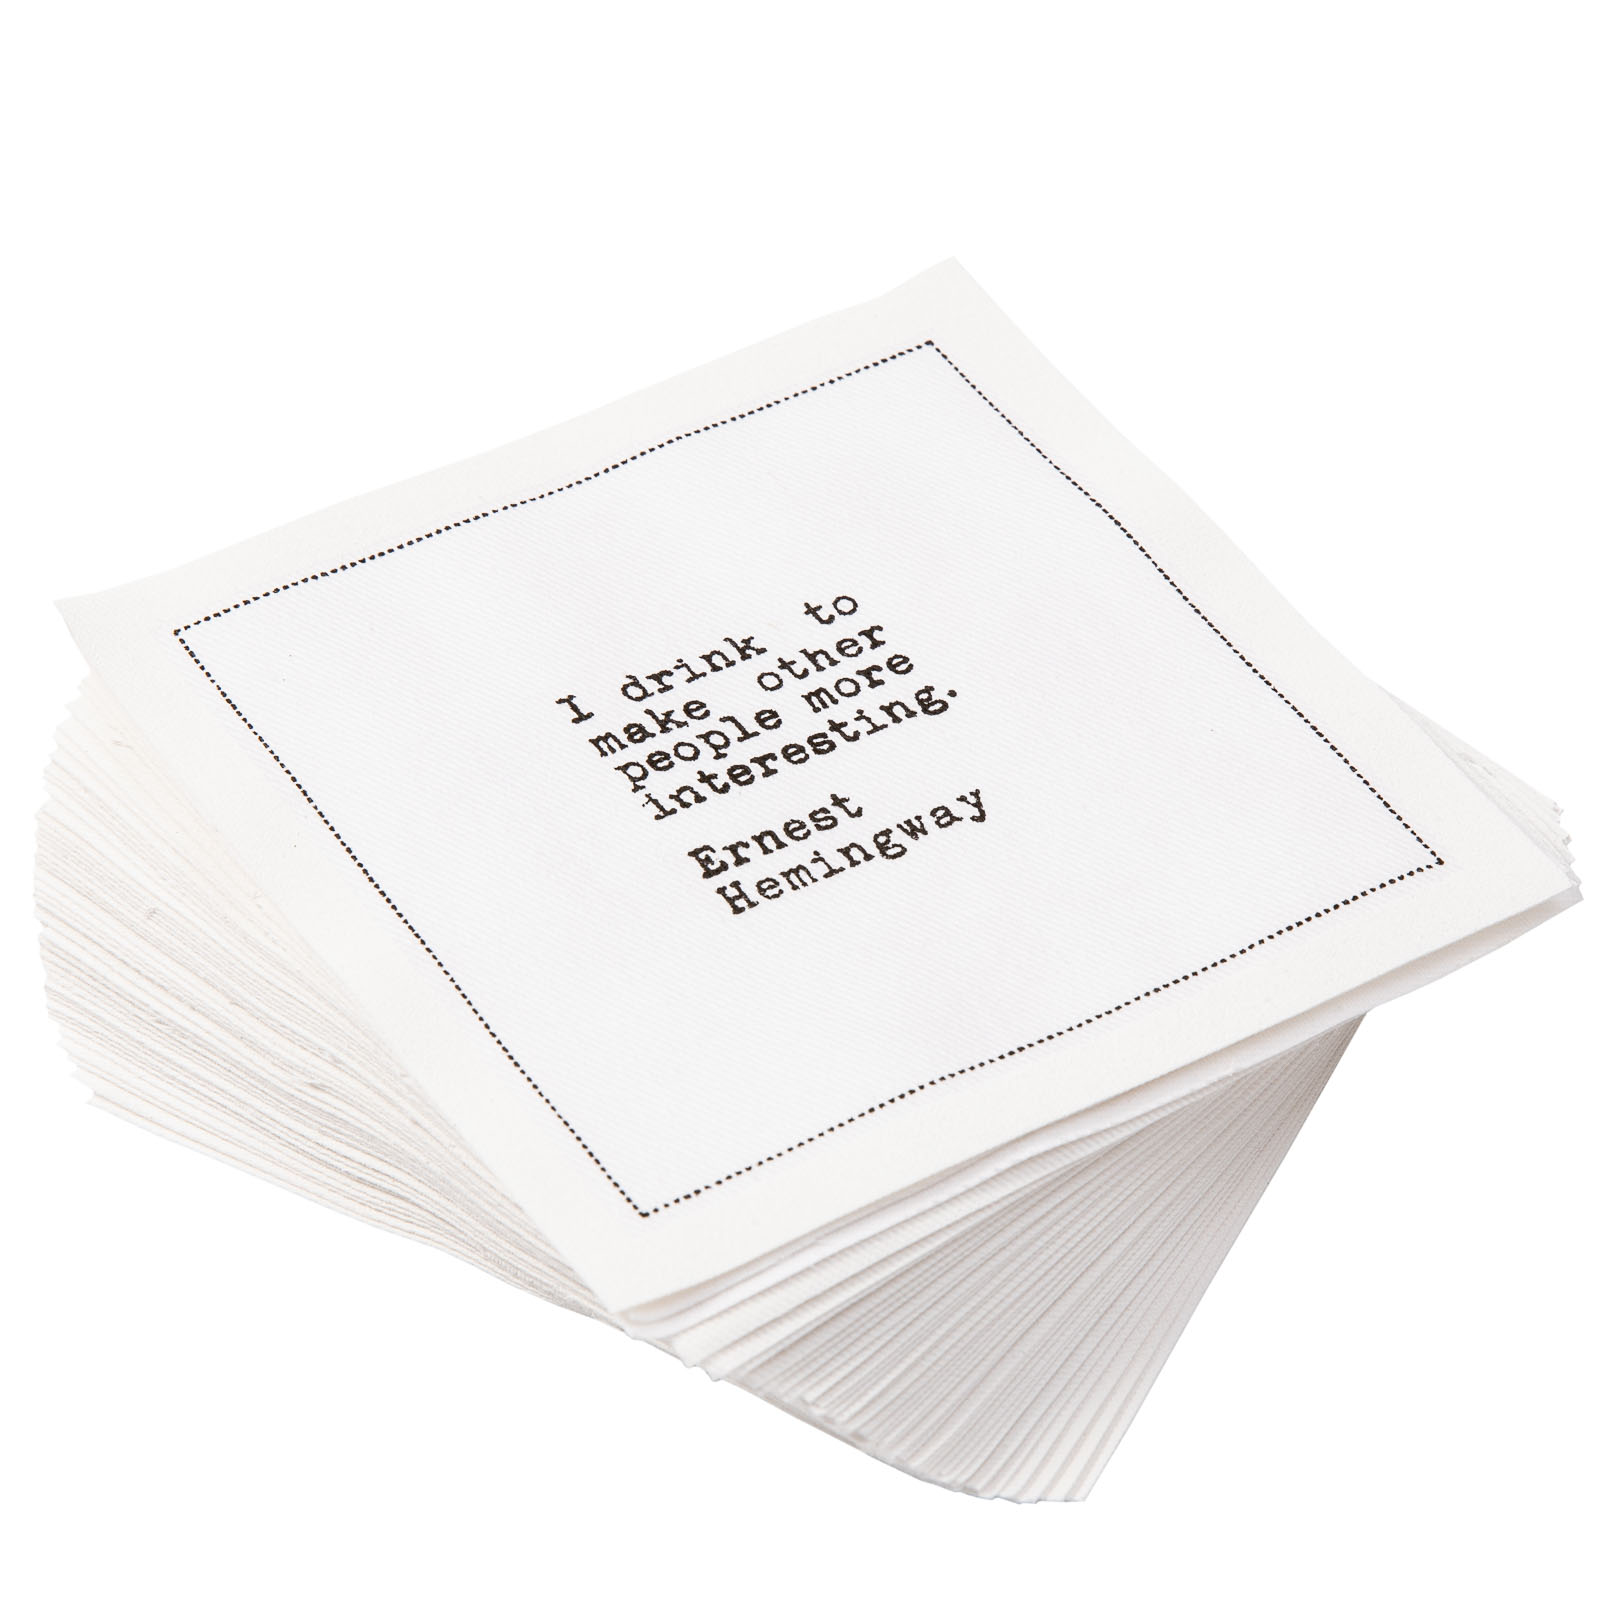 White Cotton Cocktail with Drinking Quotes 100% Cotton - 4.5" x 4.5" - 100 Units